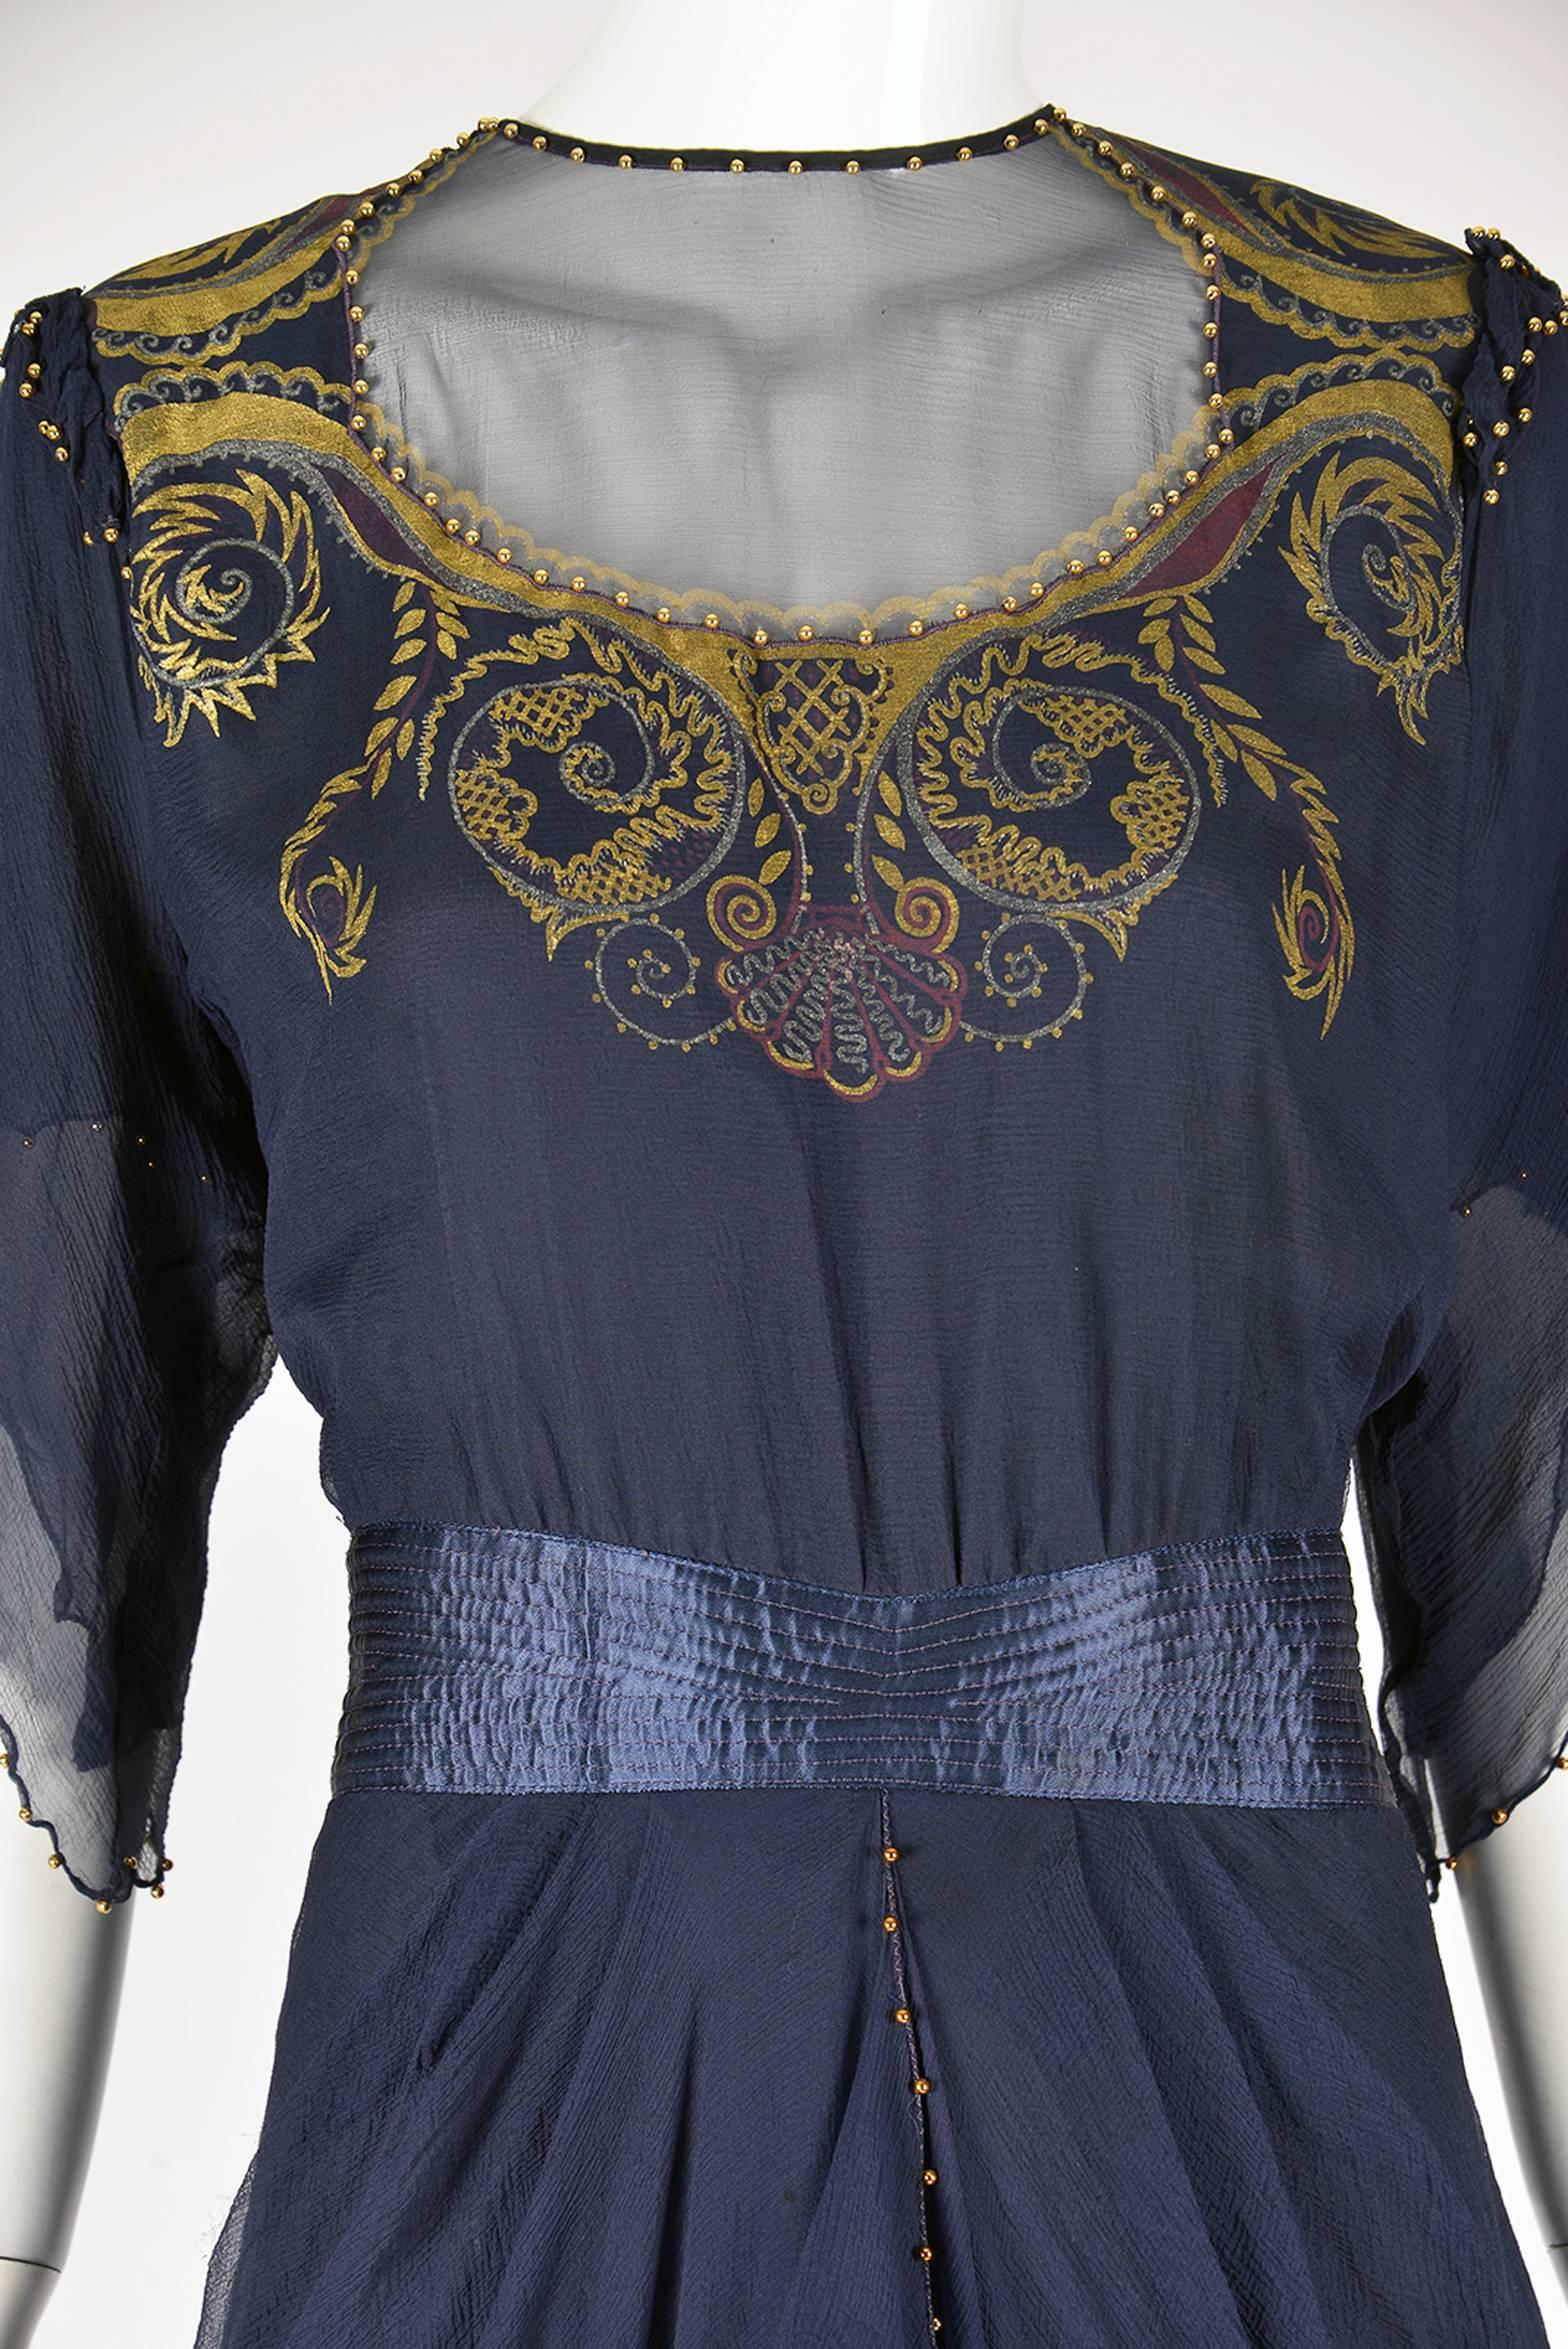 
Wonderfully designed & screen-printed 1970s Zandra Rhodes navy blue silk chiffon evening dress. Screen print is in gold around the neck and back. Small gold metal ball detail trim along the neck line and front yoke, continues on the